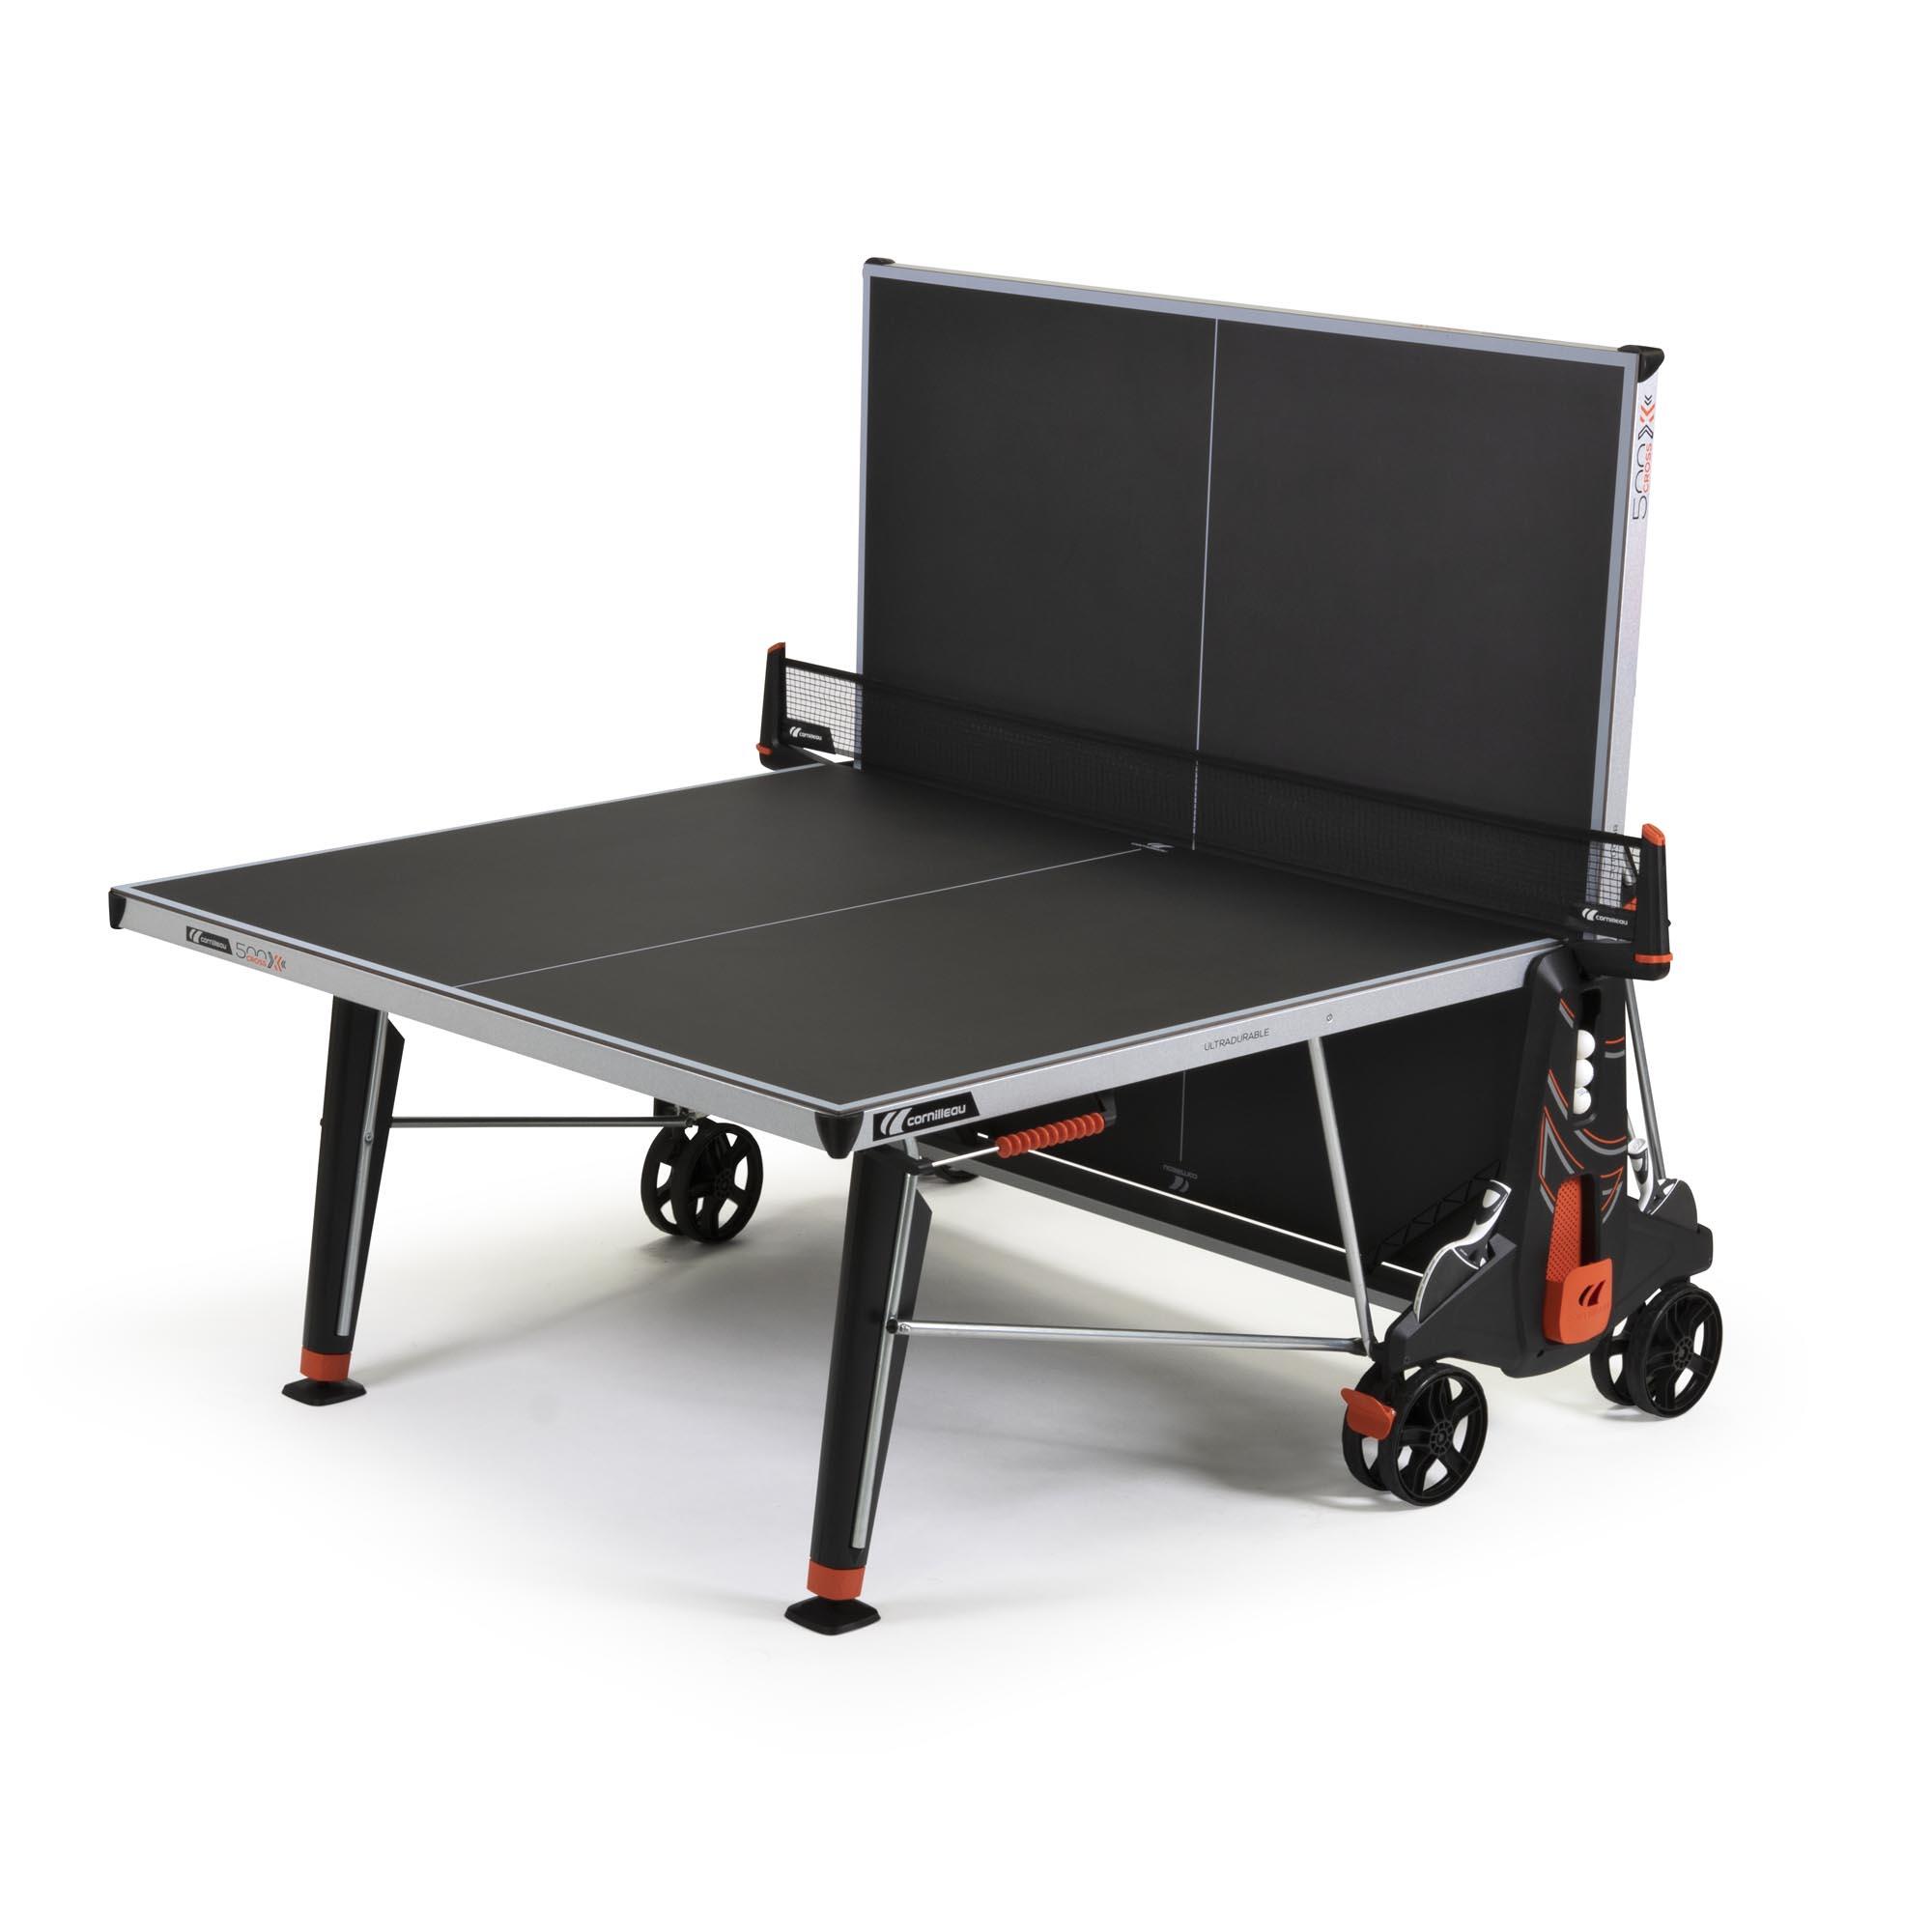 Outdoor Table Tennis Table 500X - Black 3/20